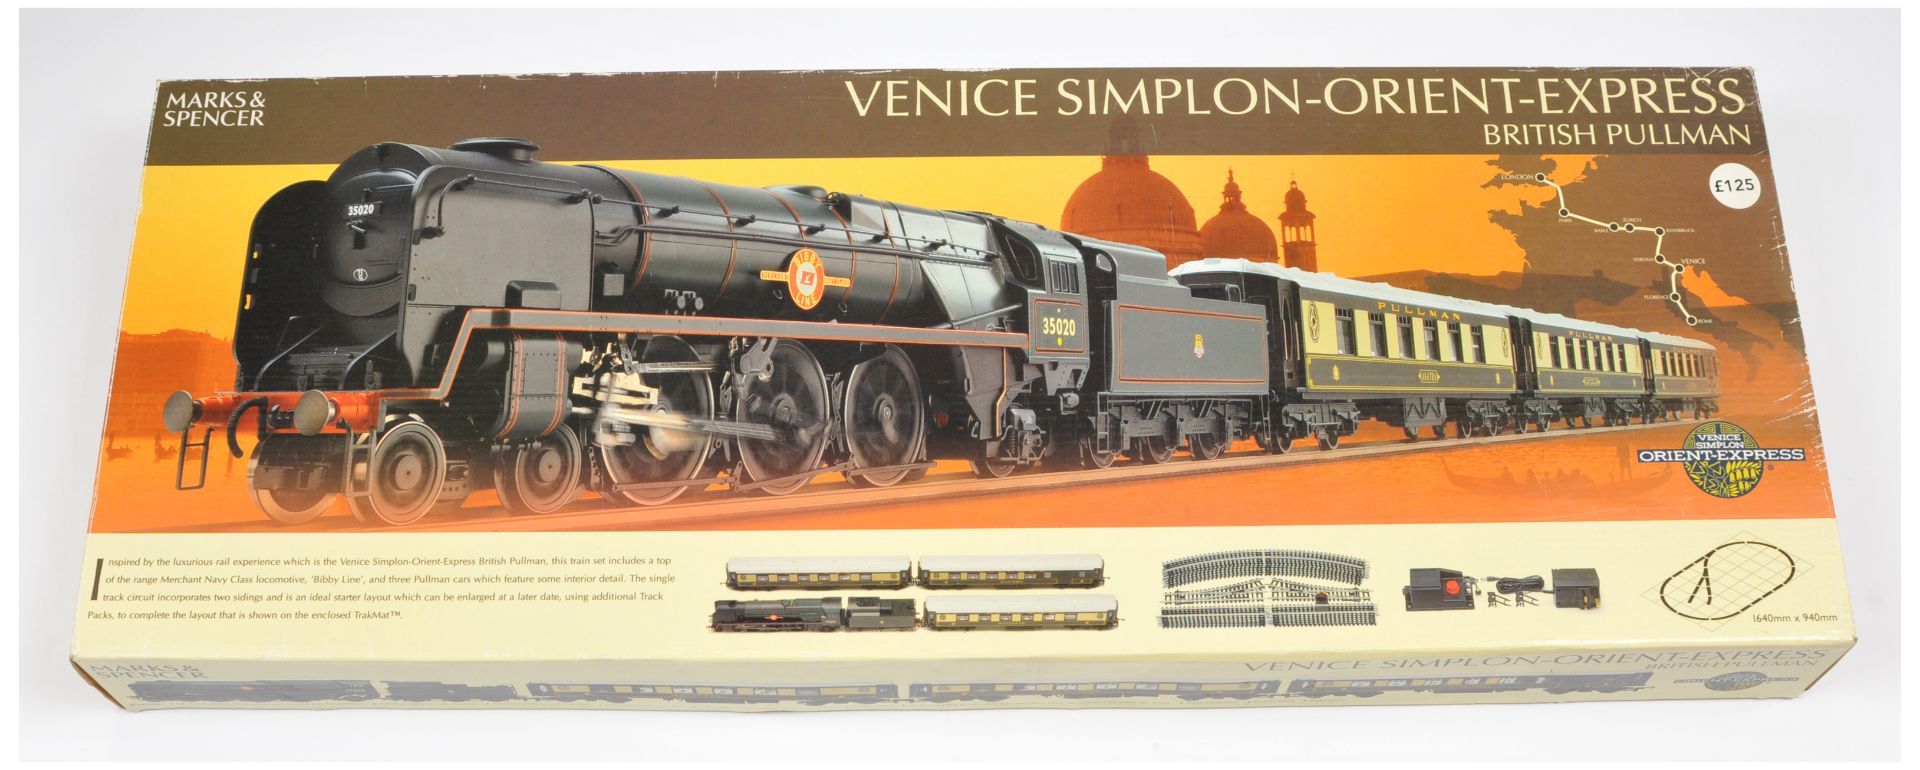 Hornby (China) R1062 "Venice Simplon-Orient-Express" Train Set (made for Marks & Spencer) 